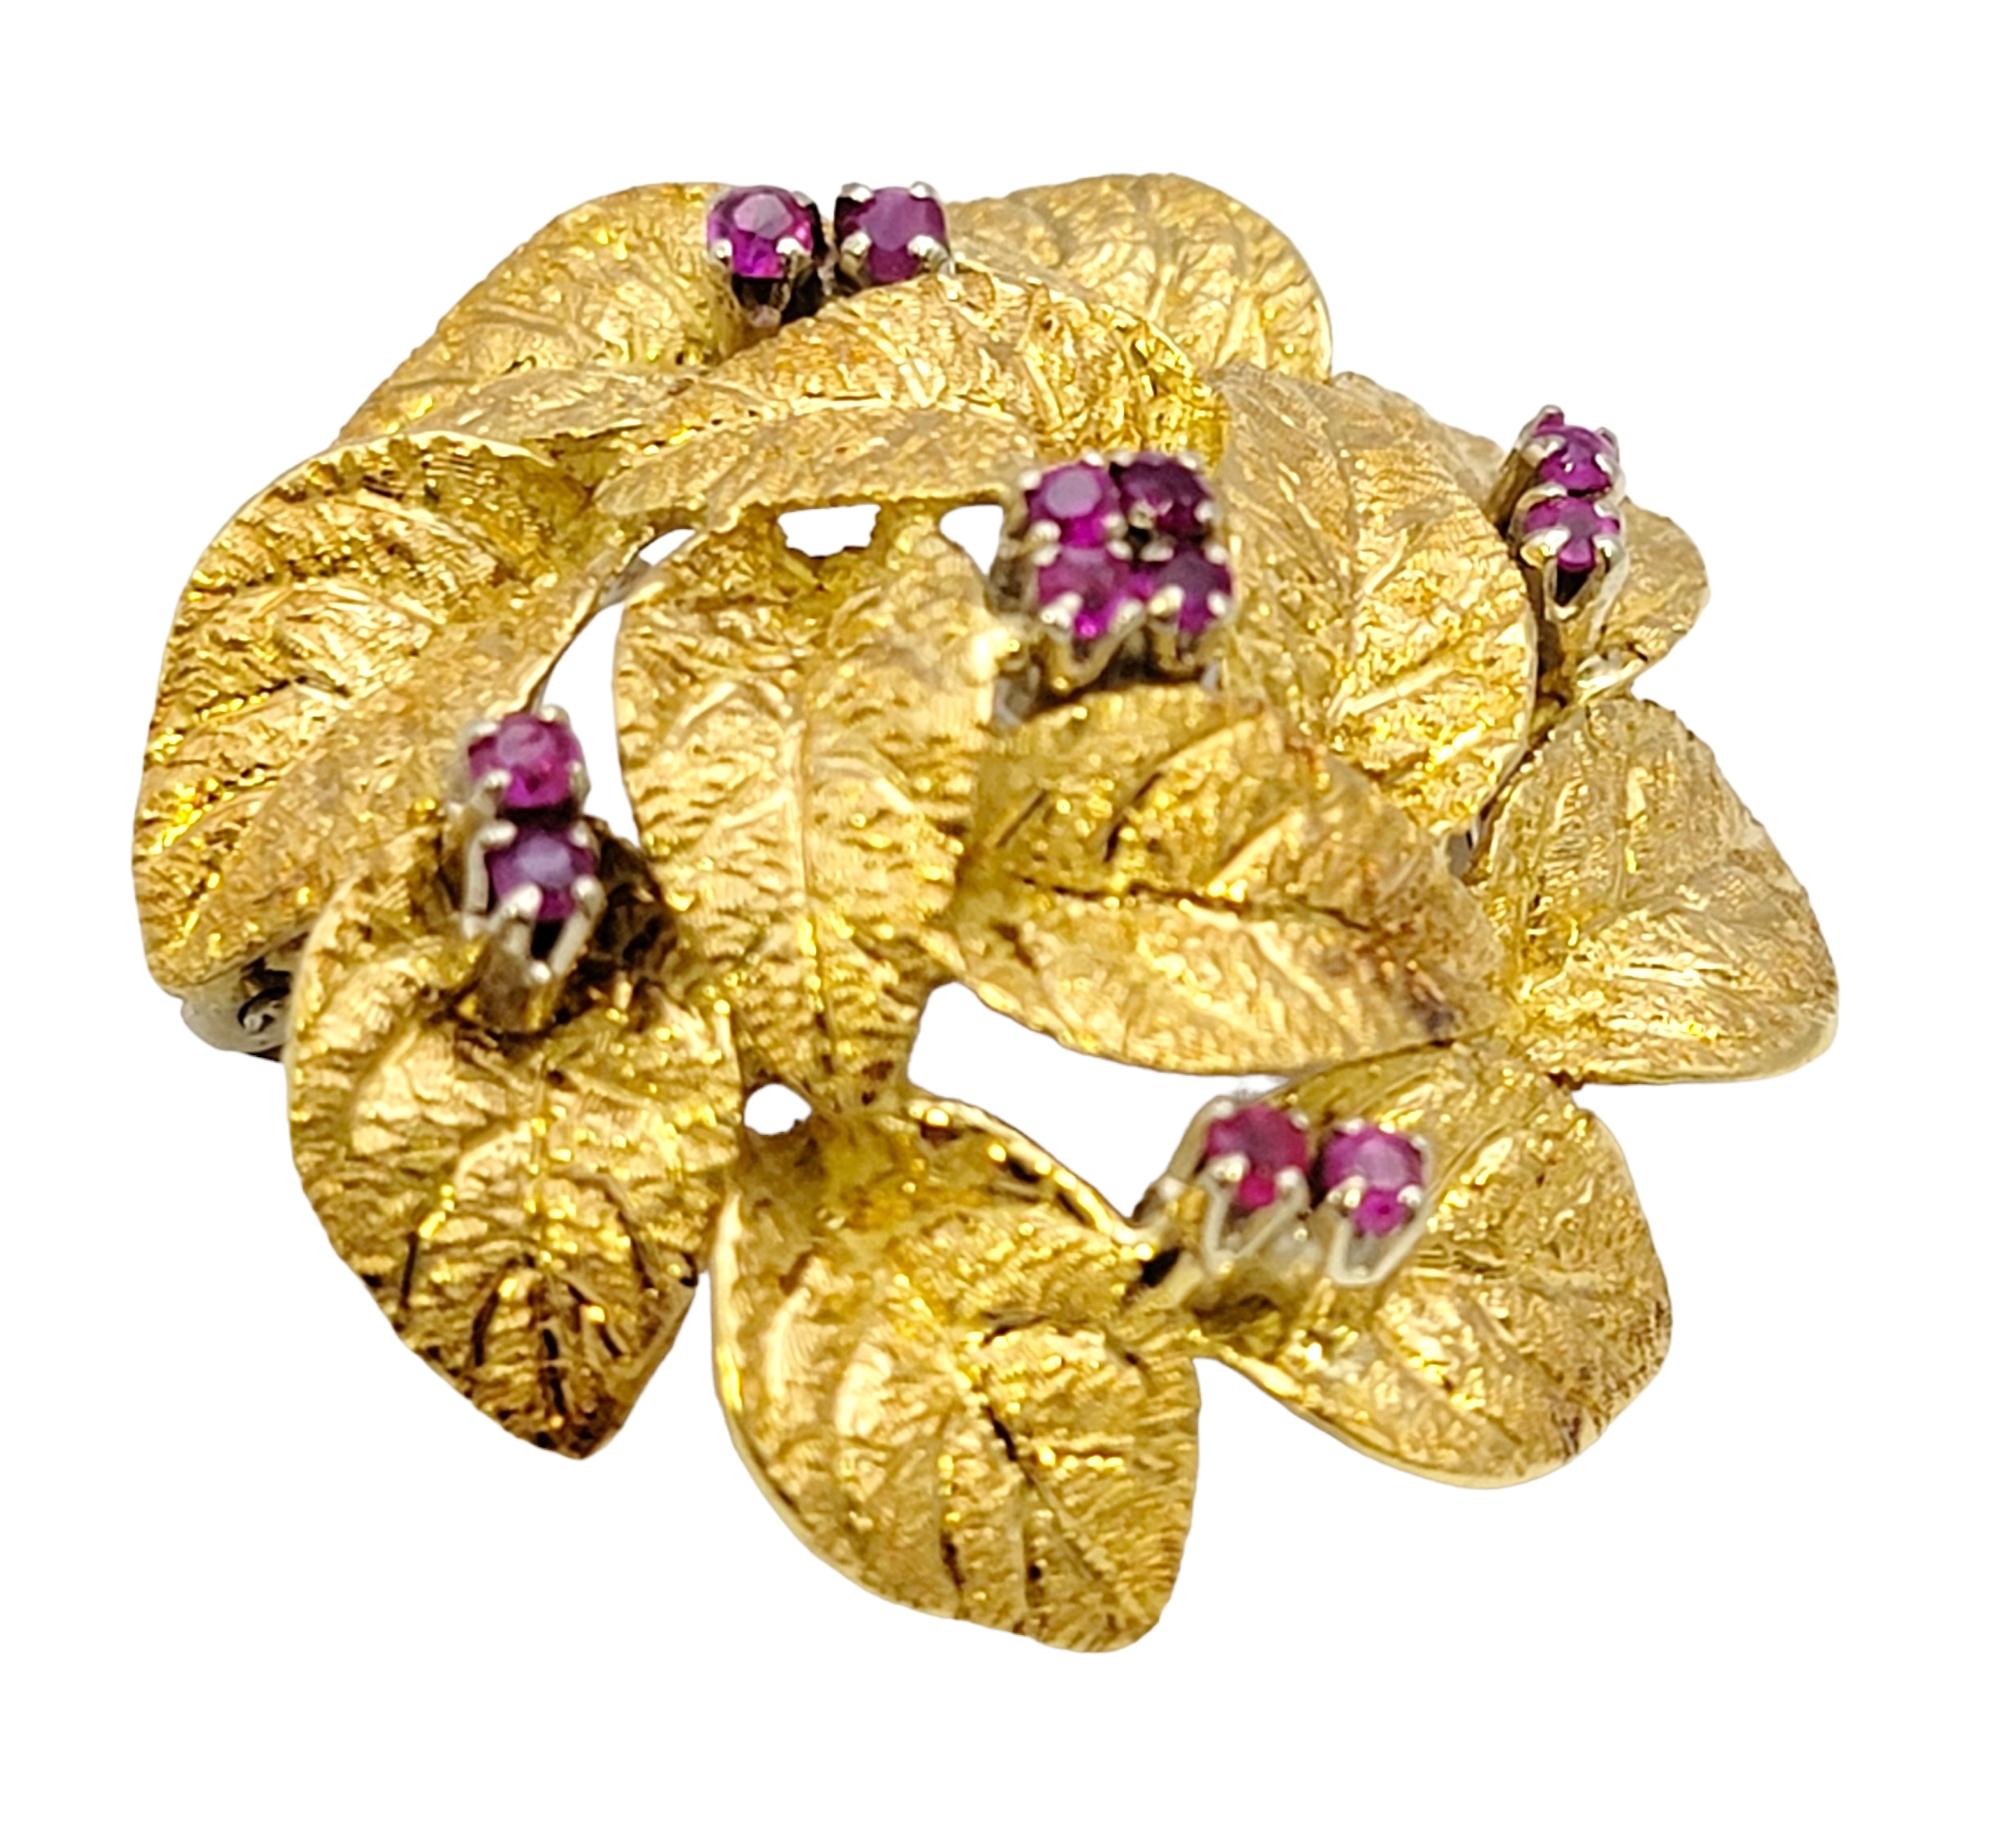 This gorgeous lady's brooch is the absolute perfect addition to your wardrobe. The sparkling natural rubies will add the perfect pop of color to anything it is paired with, while the classic design will remain a timeless jewelry staple.

This